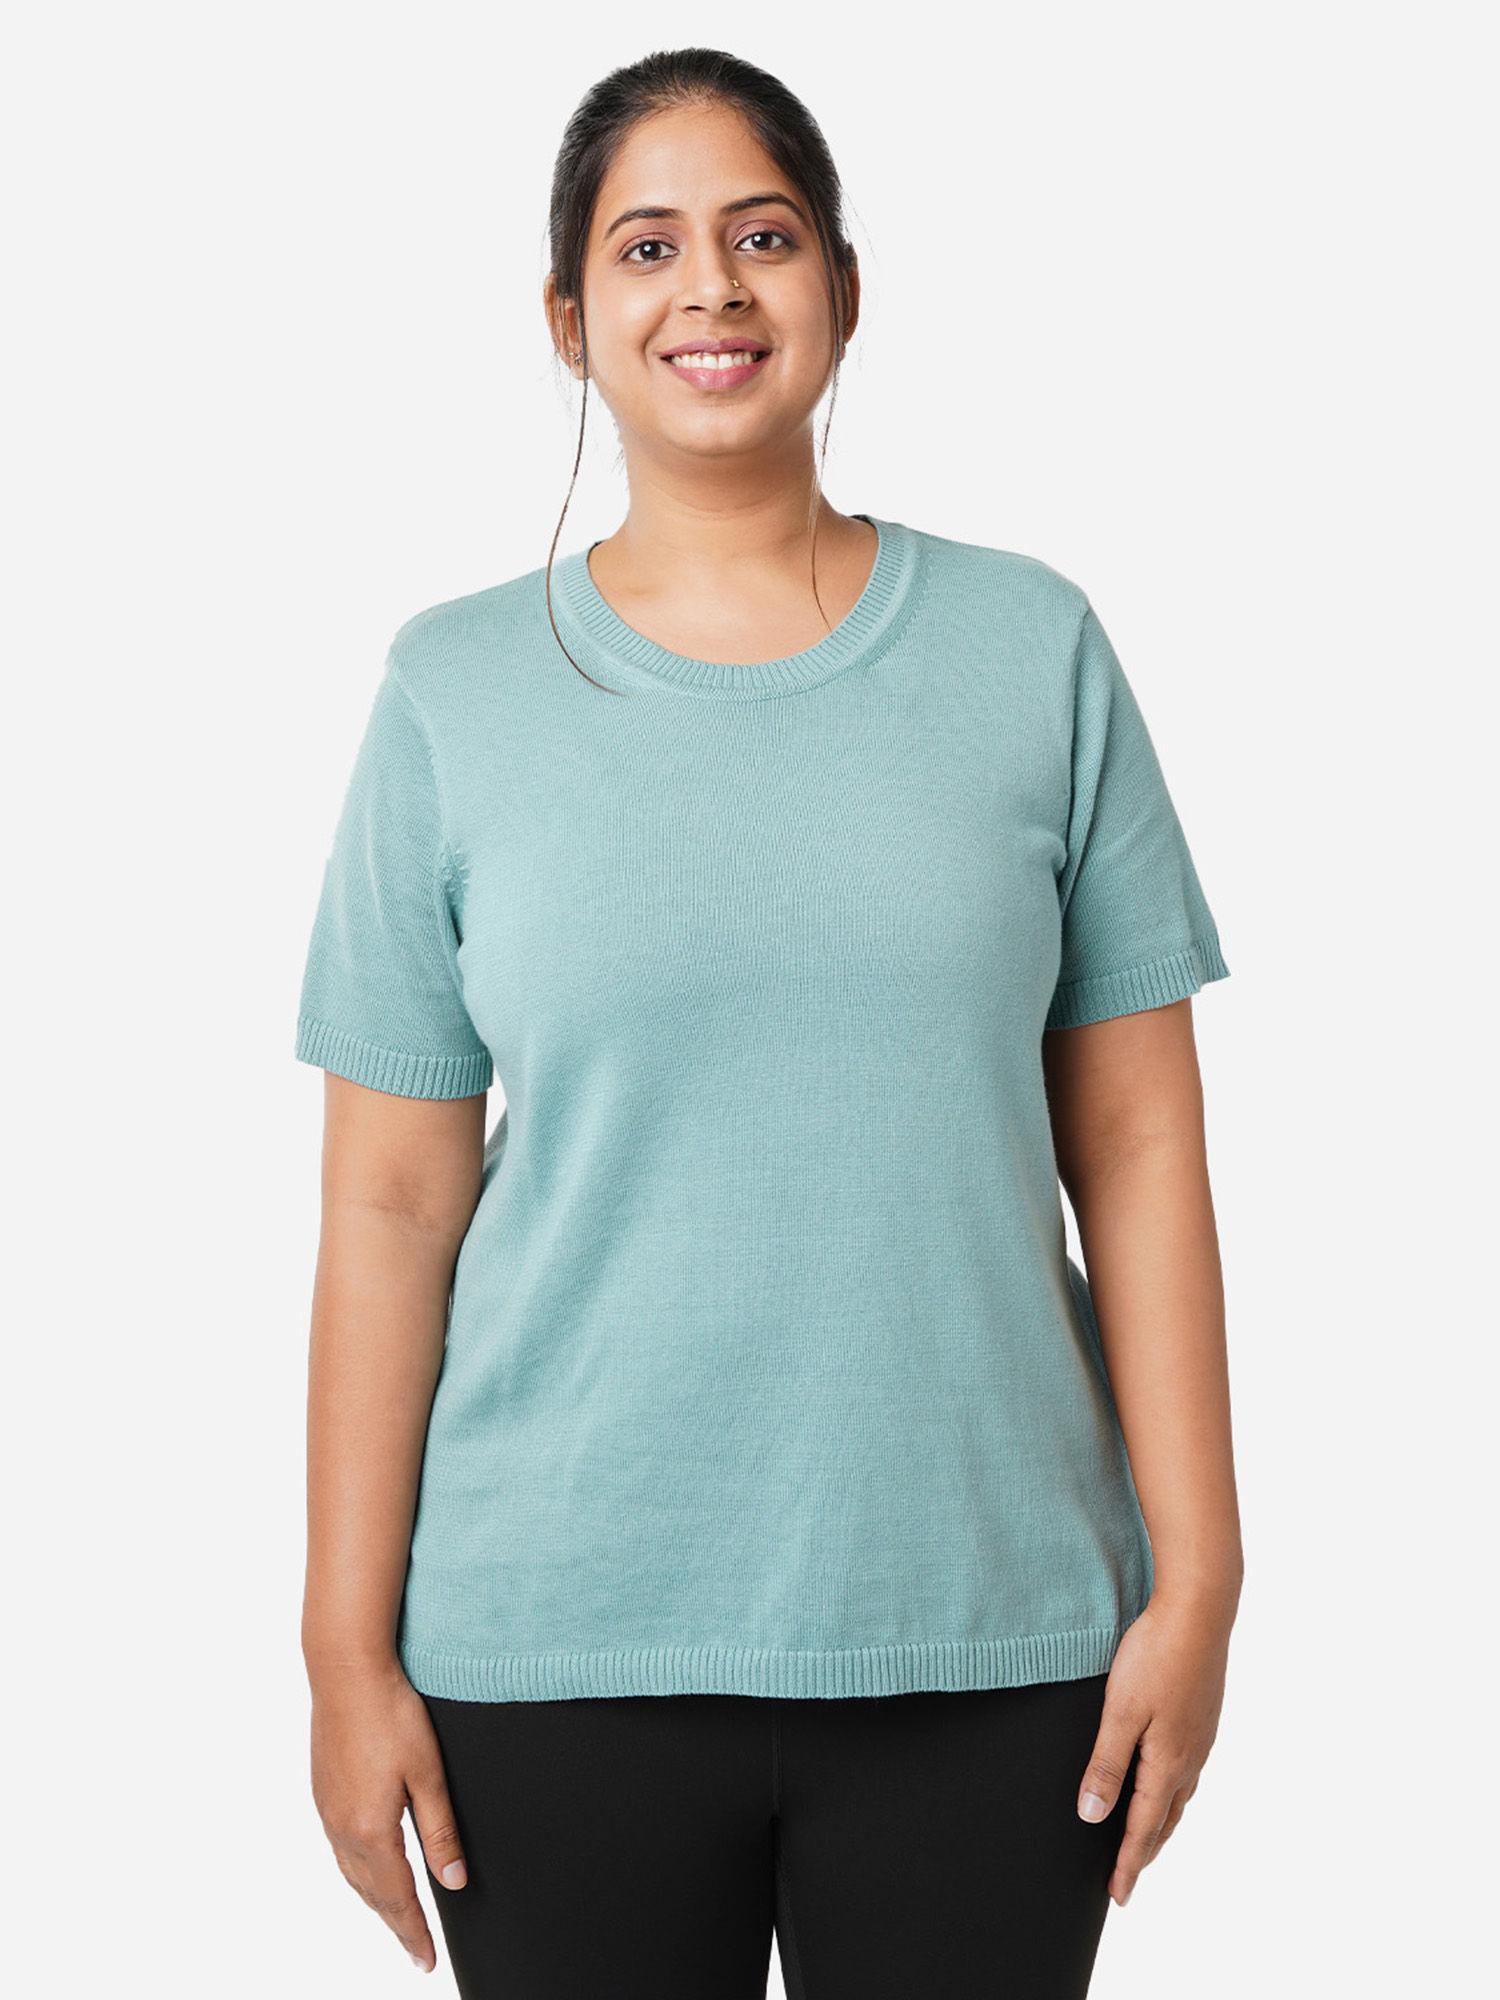 women jade at ease cotton knit top with side slit